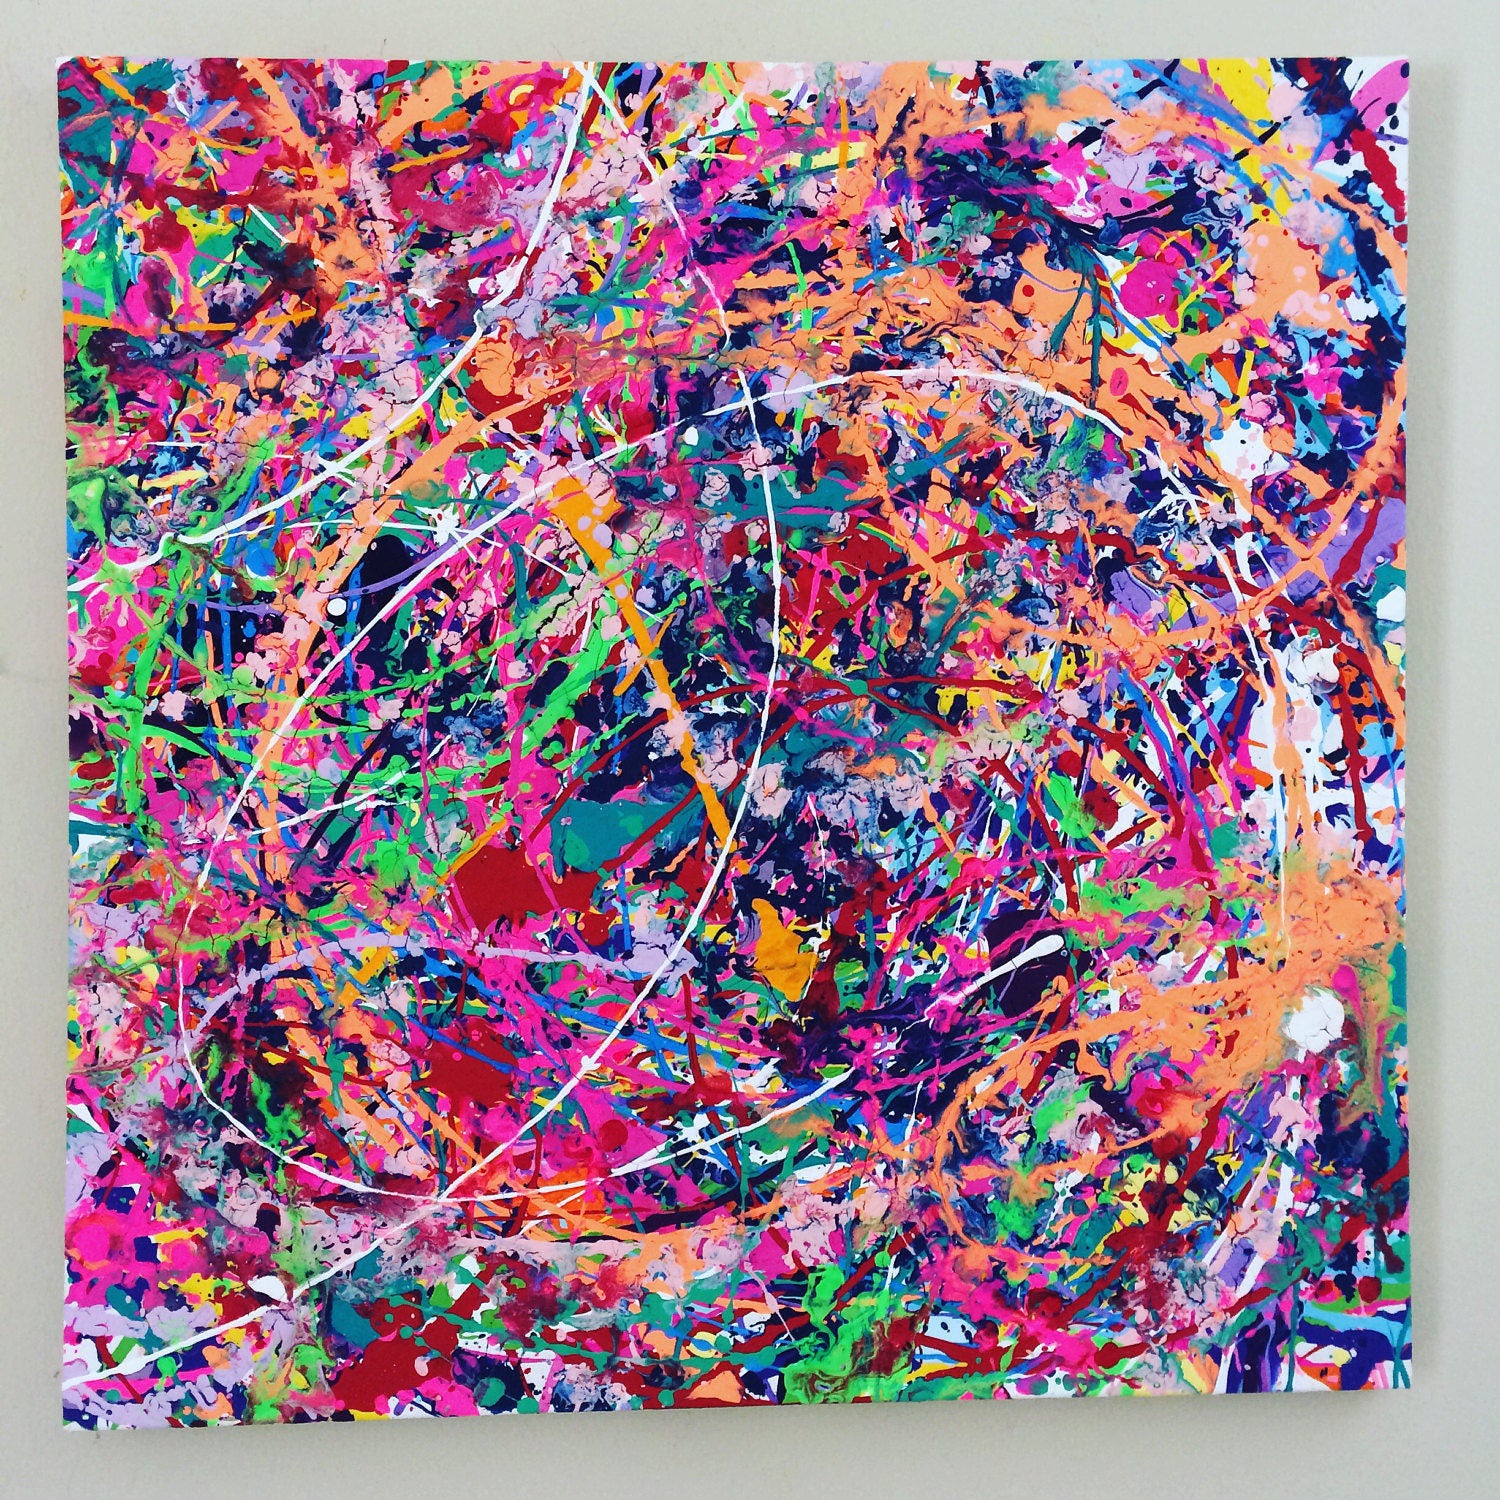 Neon Abstract Art Splatter Painting Colorful Canvas Art Large